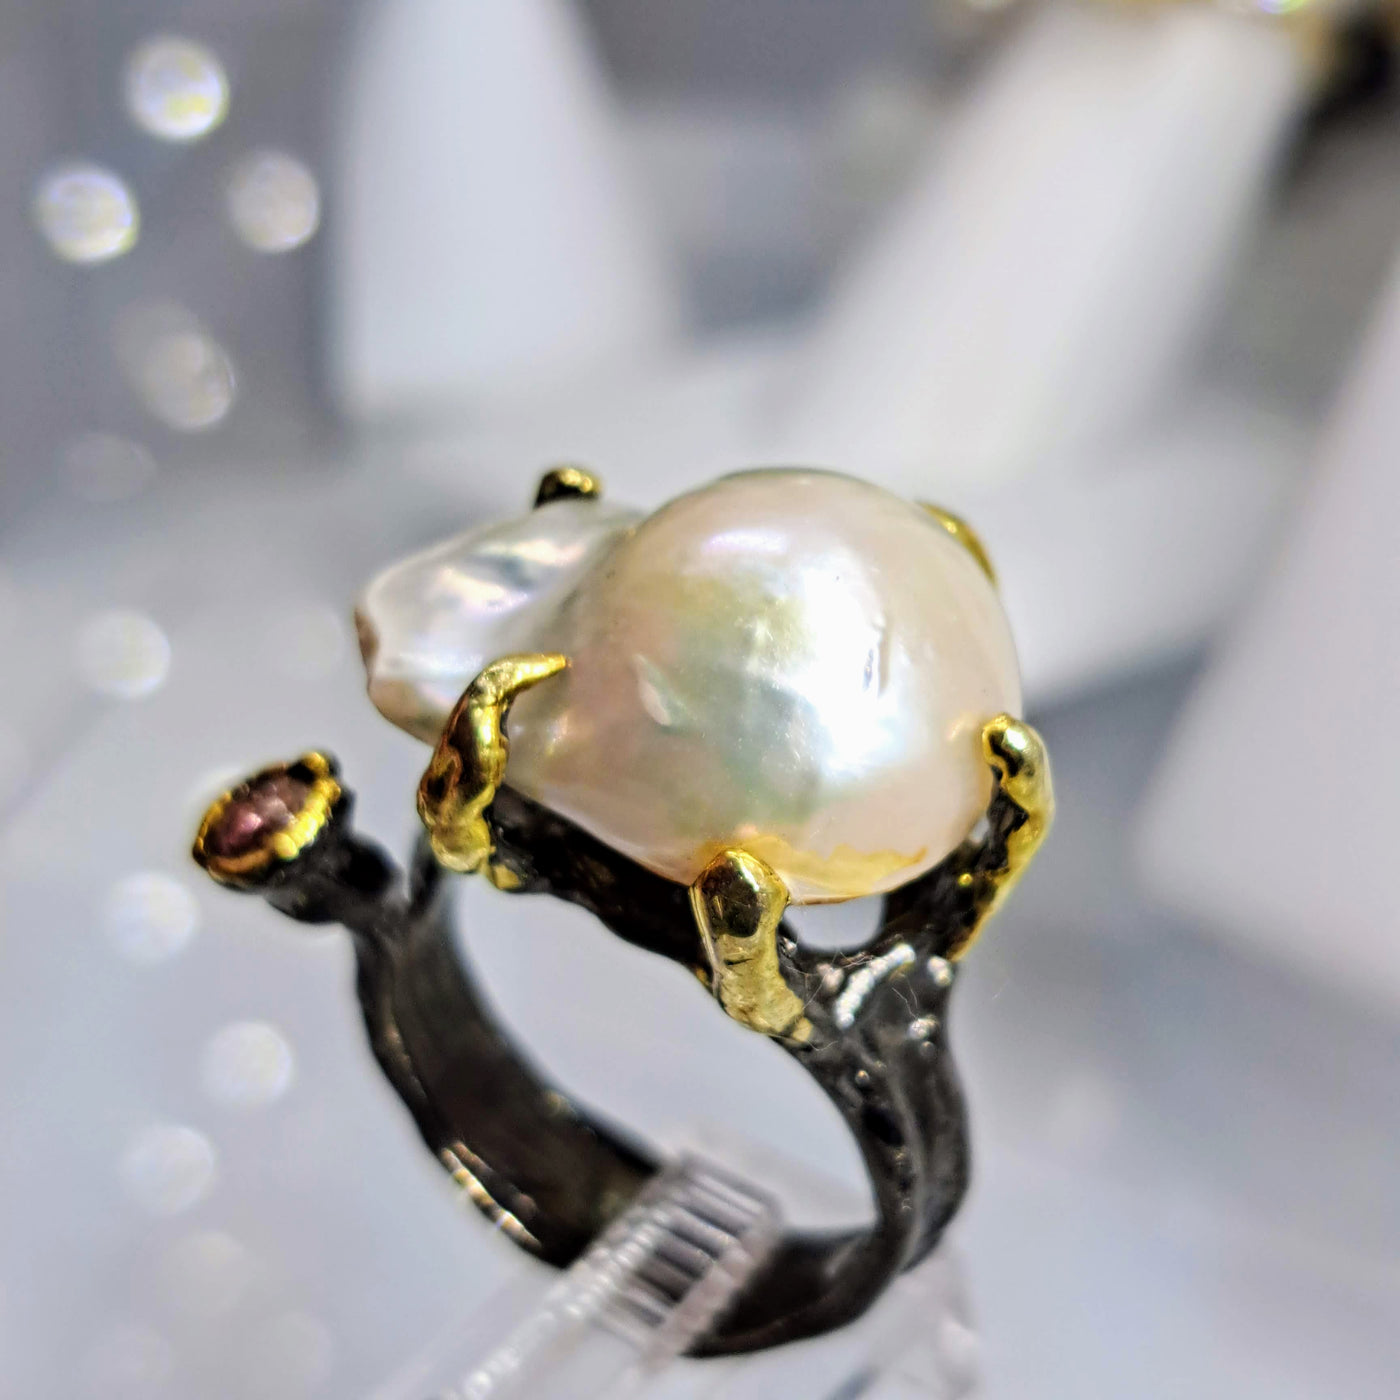 "Bauble Ring" Size 8.25 Ring - Baroque Pearl, Tourmaline, Black Sterling, 18k Gold